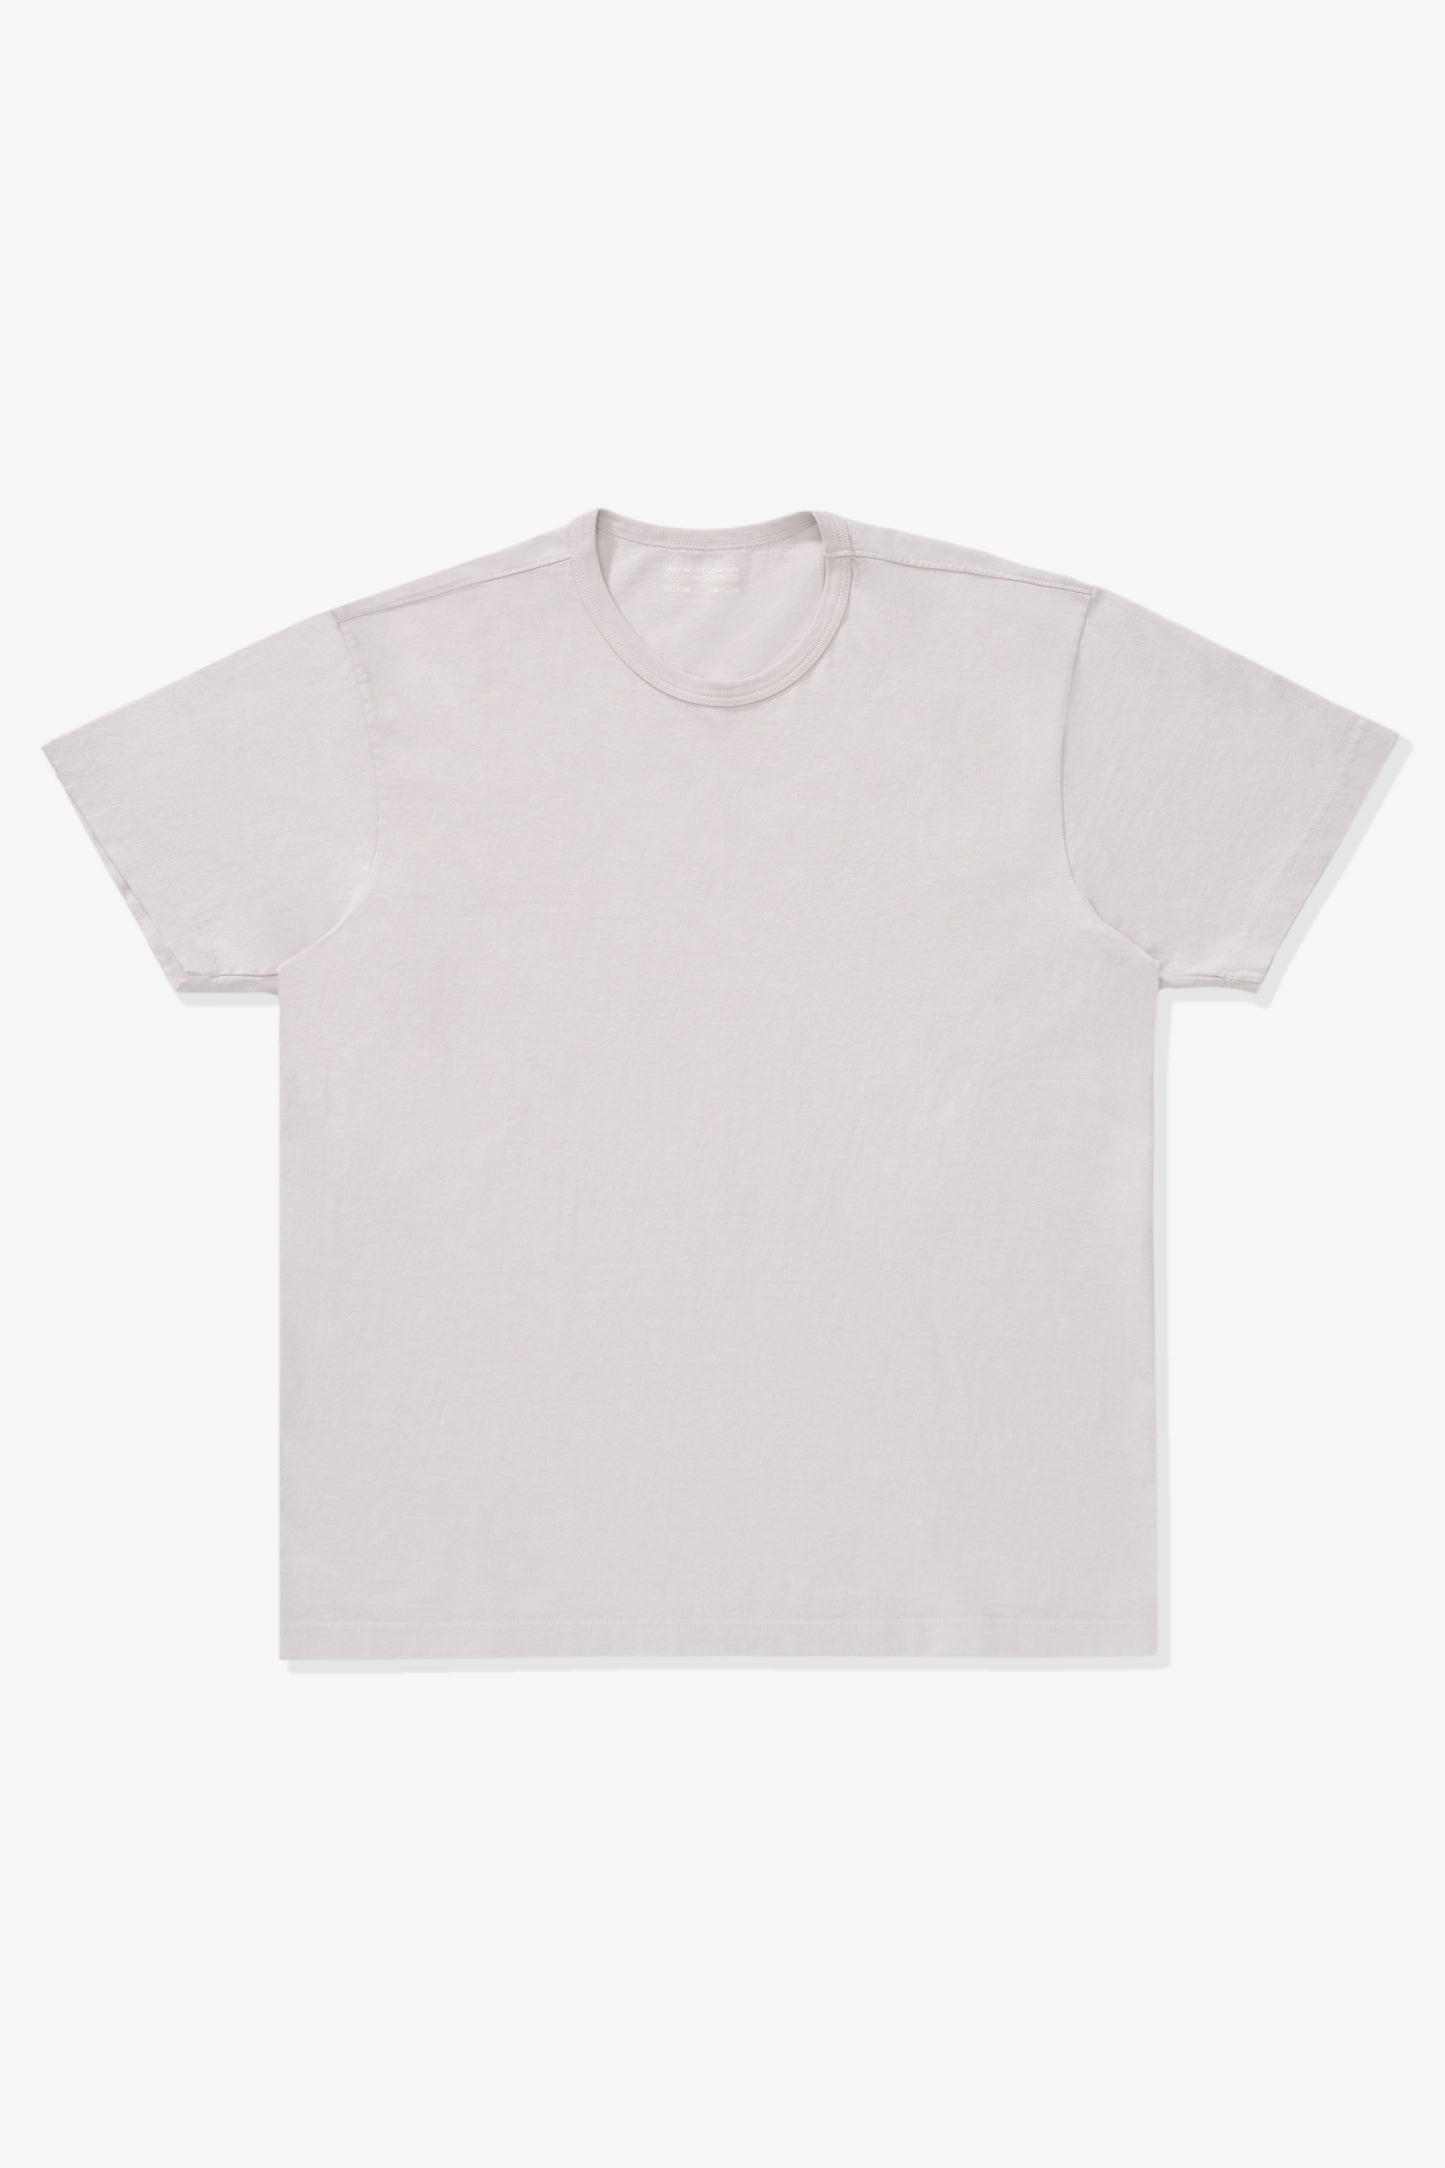 Lady White Co. Our T-Shirt - Post Grey LW101